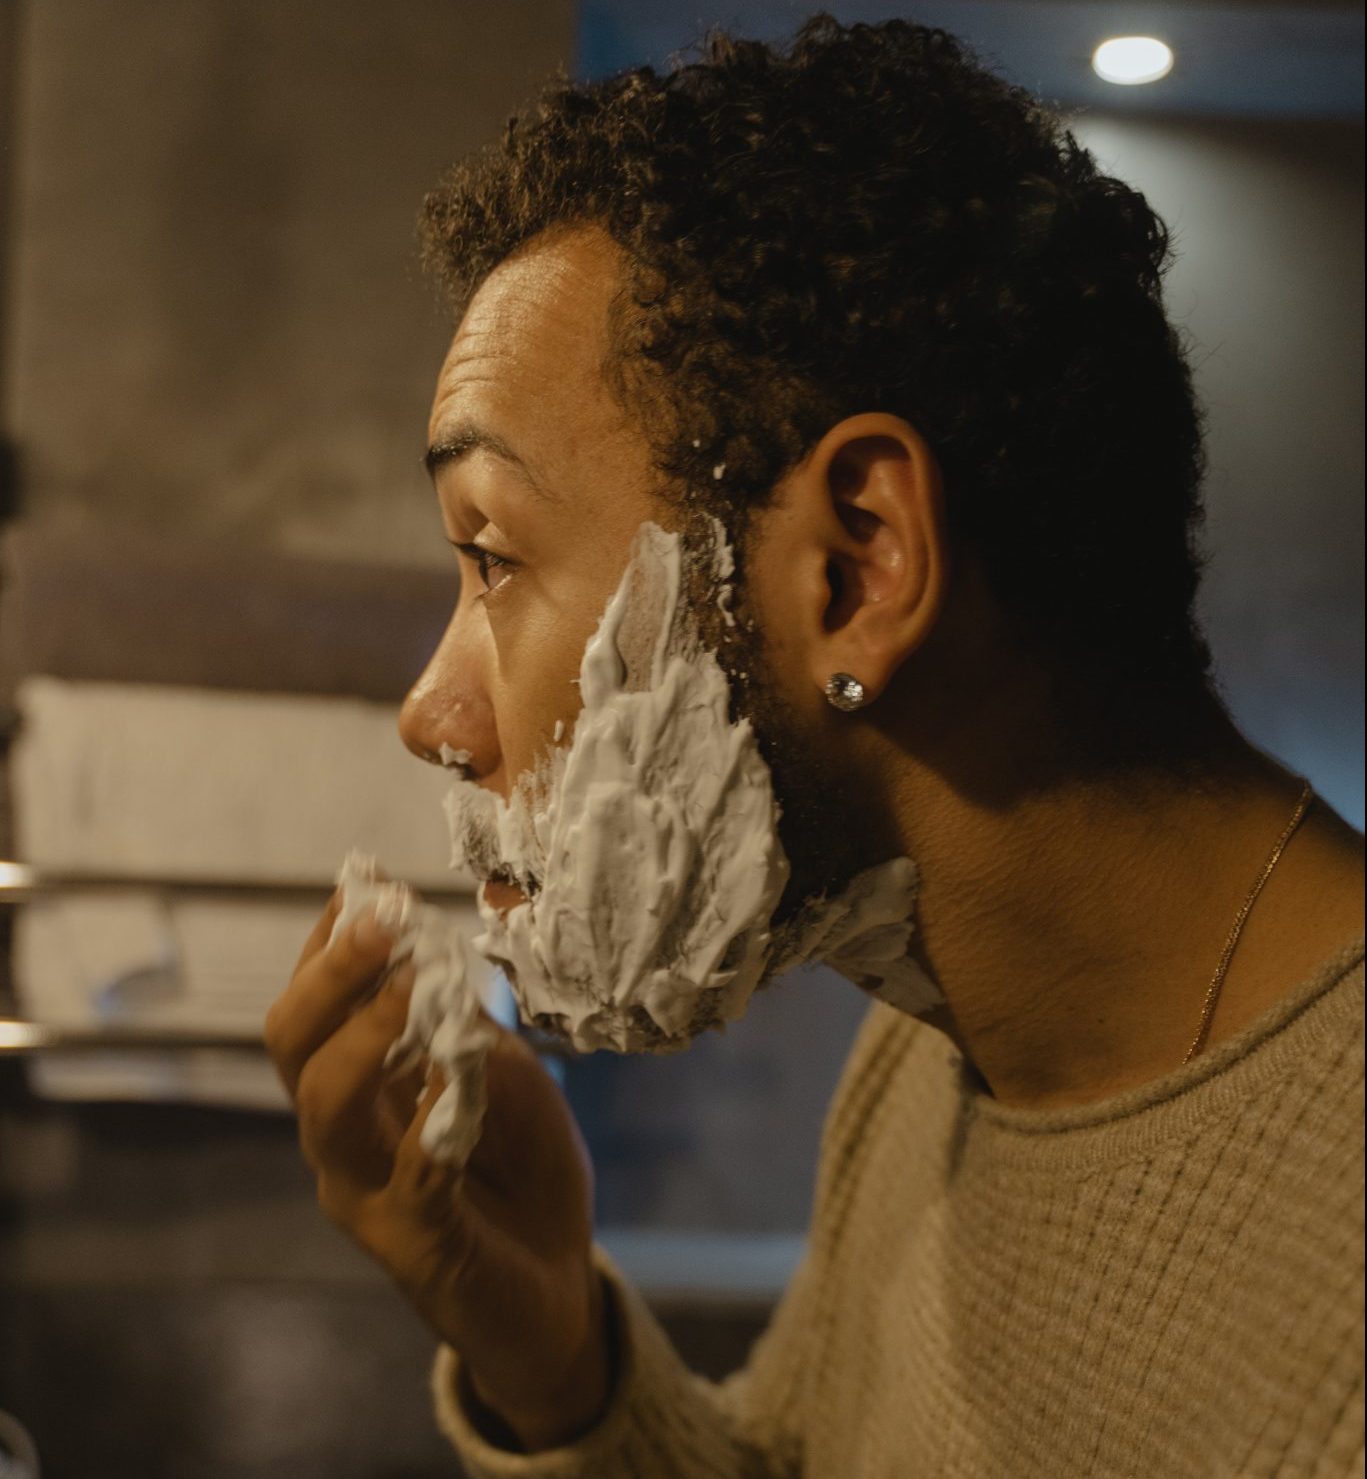 shaving,wet shaving,wet shave,art of shave,shaving with soap,shave with razor